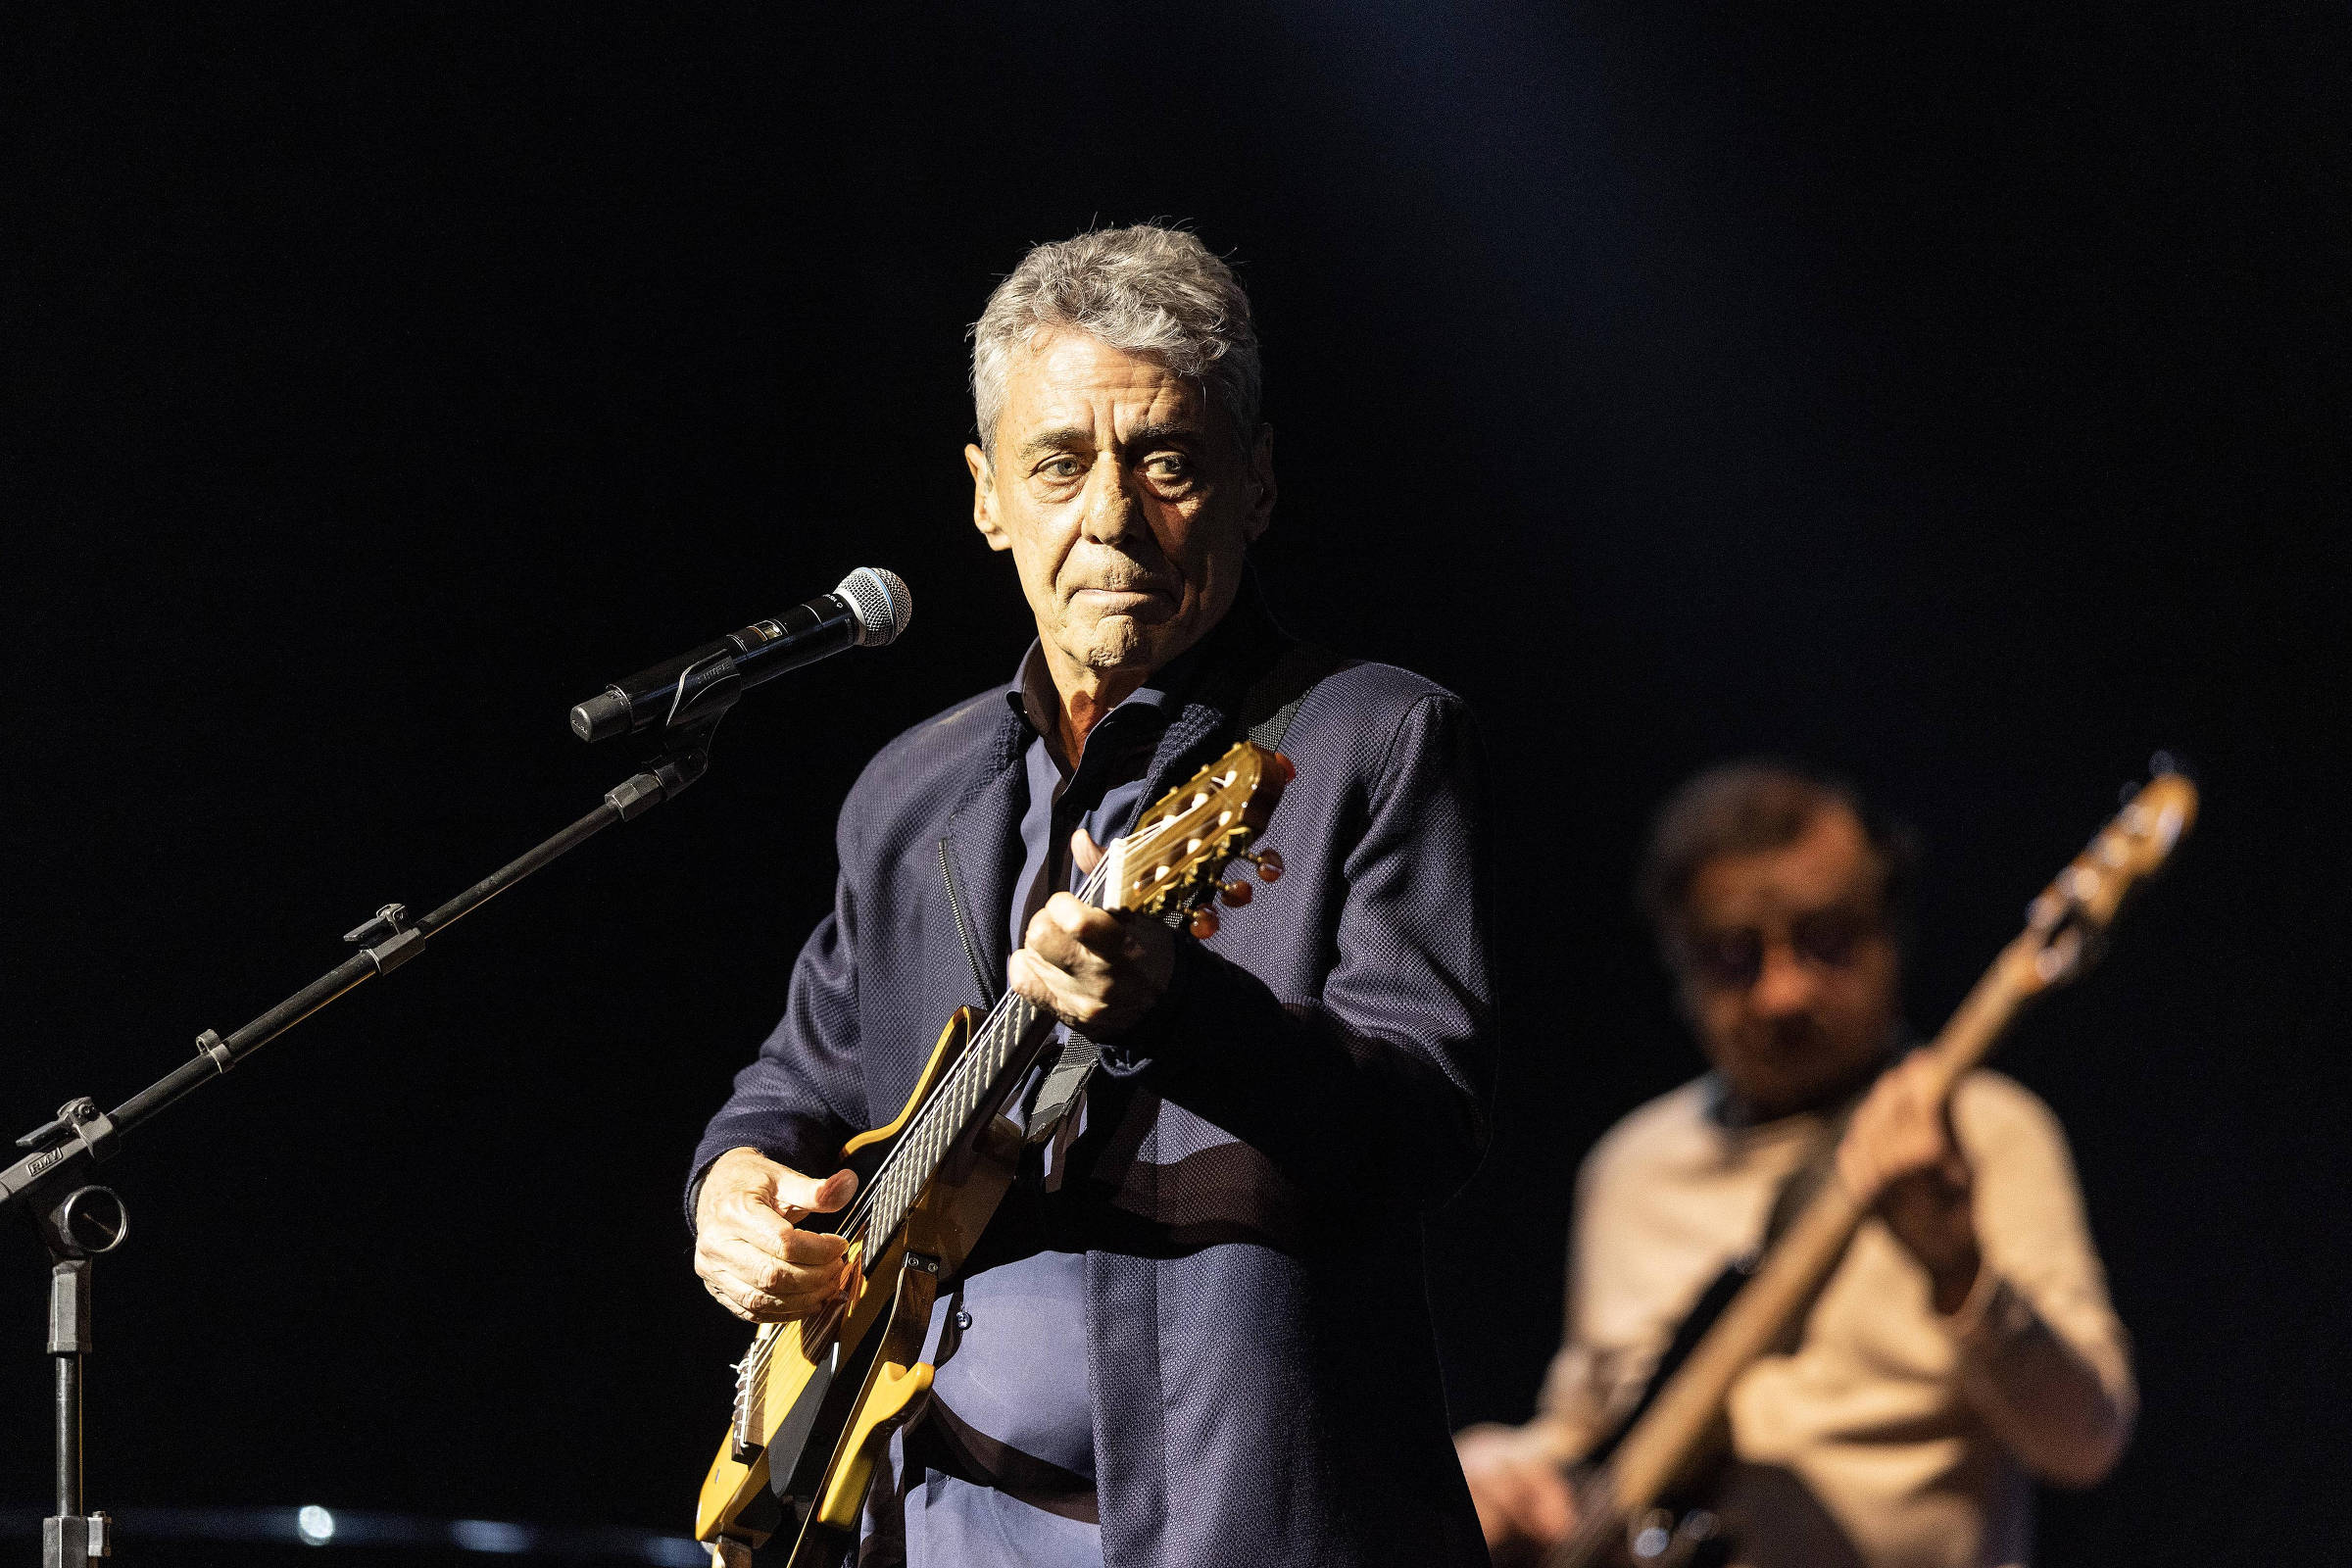 Mônica Bergamo: Chico Buarque endorses Lula and says that Israel promotes genocide of Palestinians in Gaza